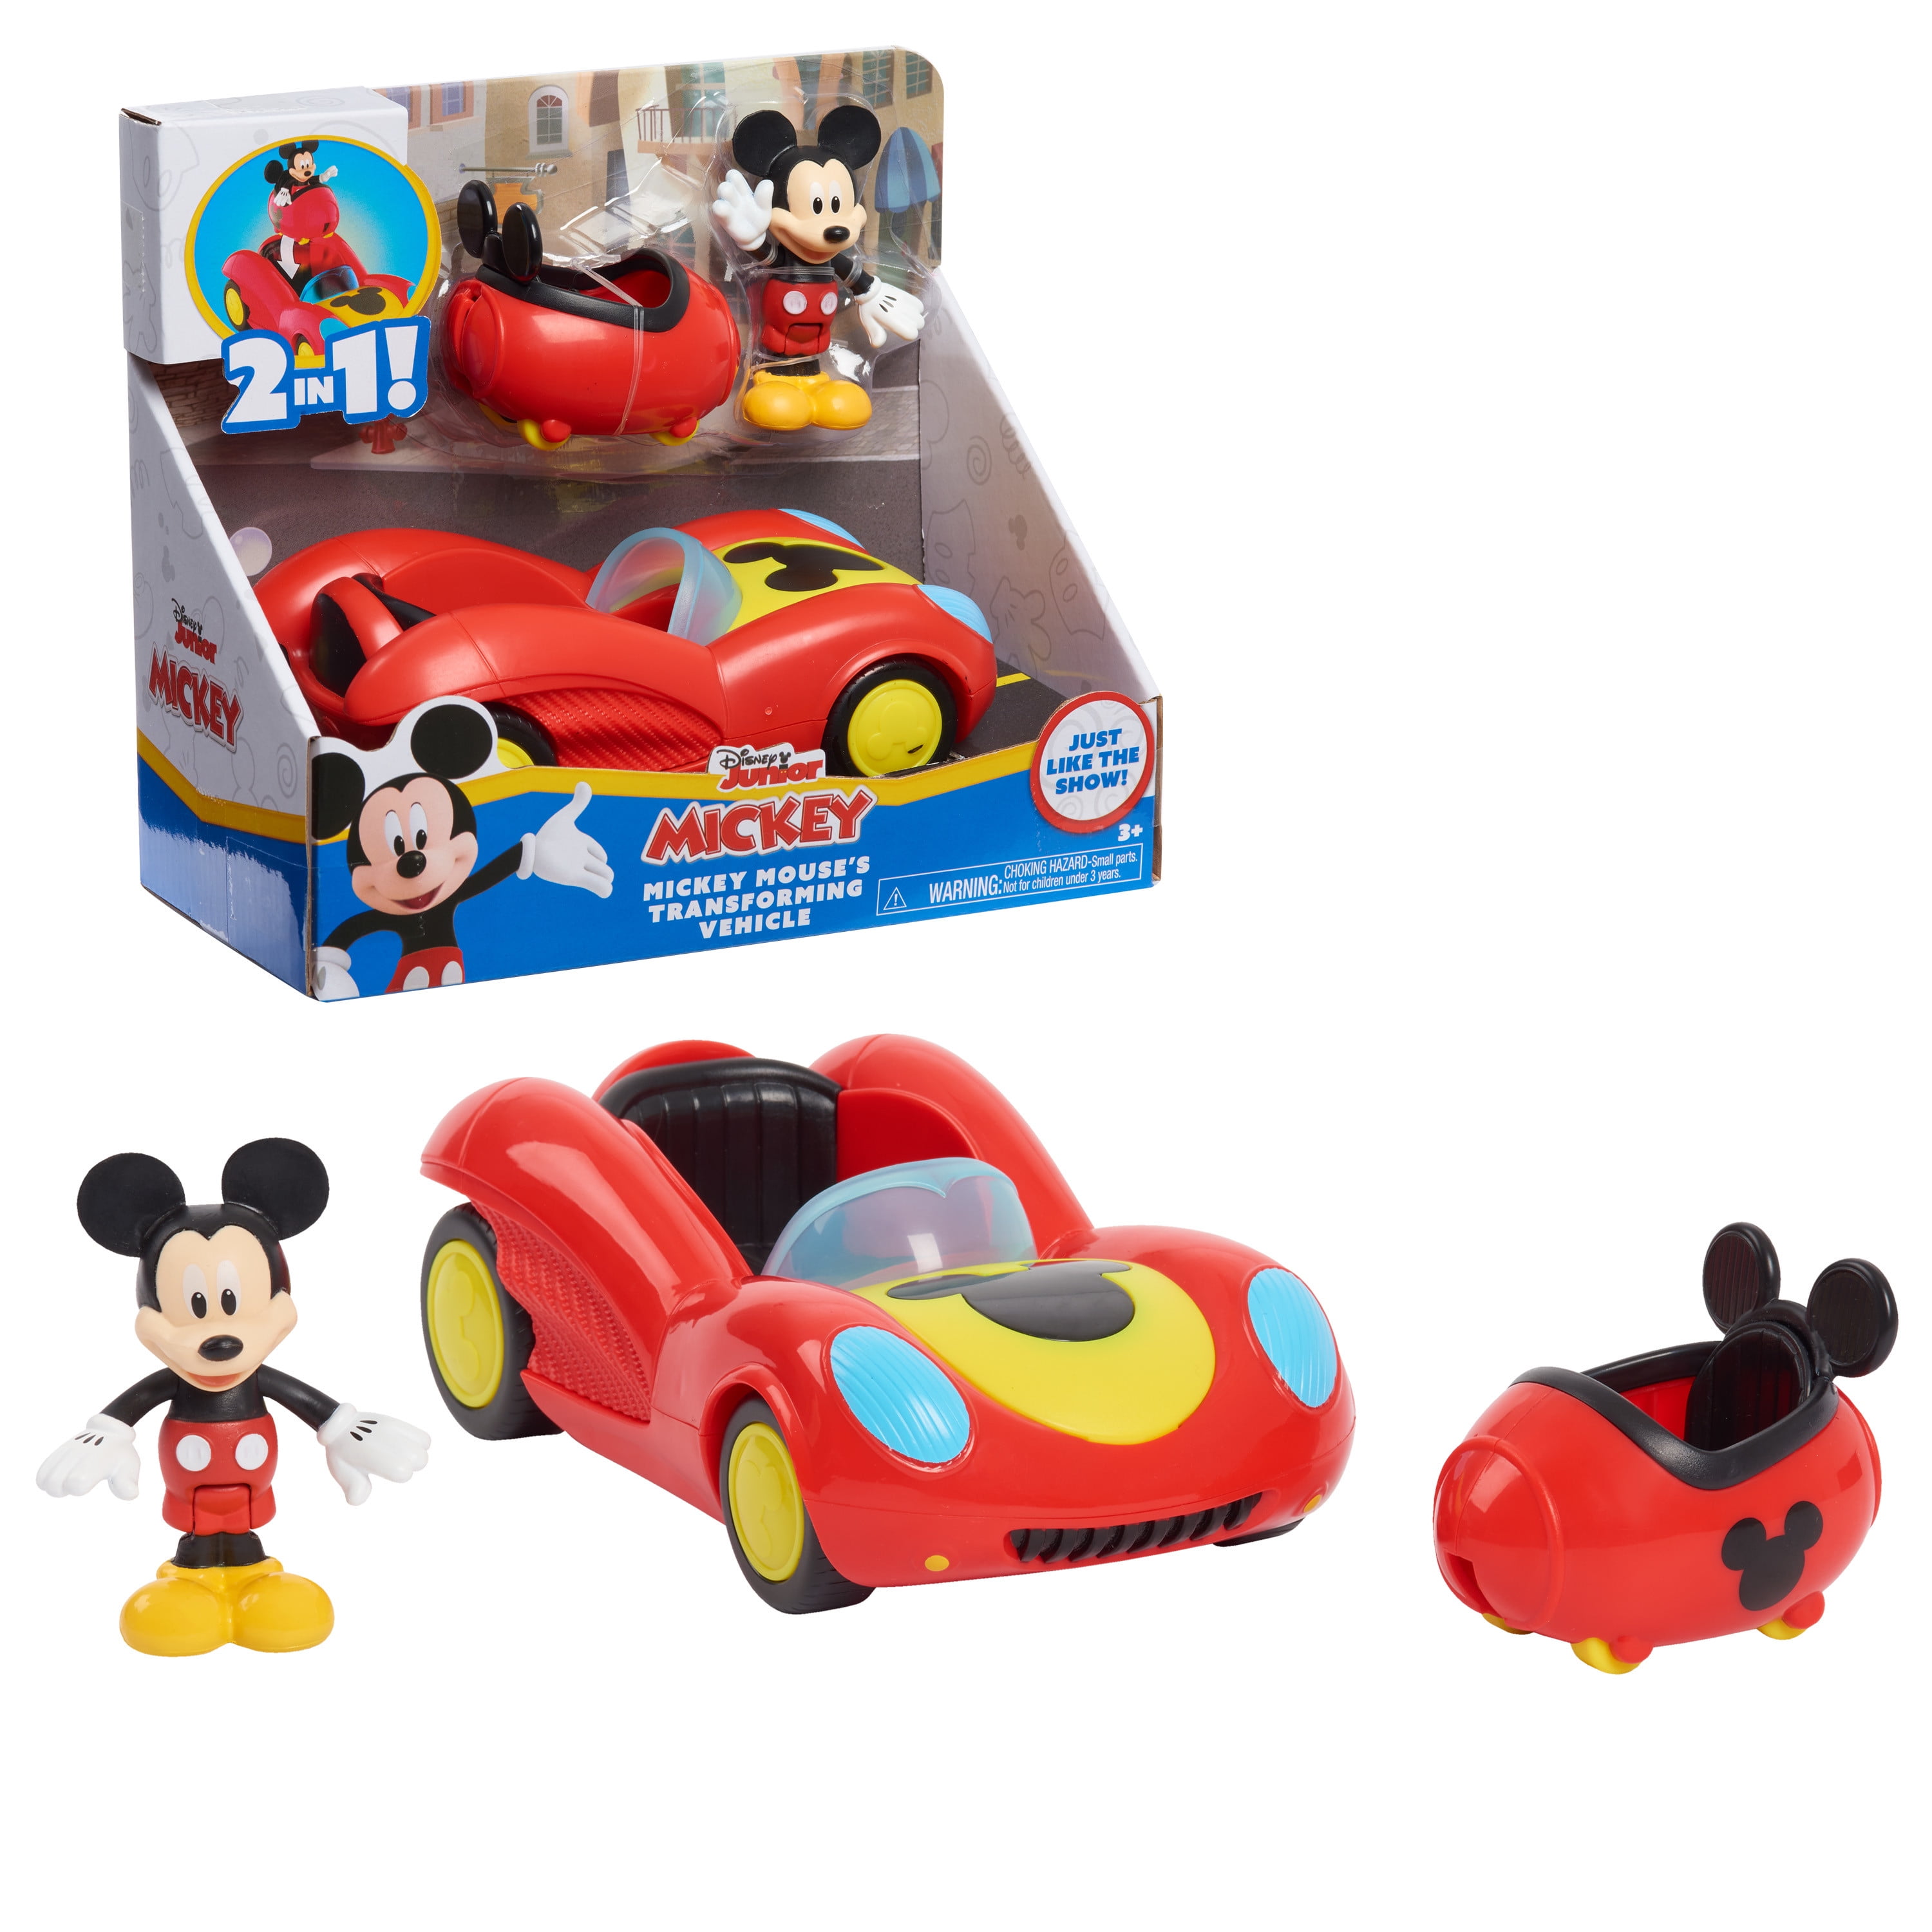 Disney Junior Mickey Mouse Funhouse Transforming Mickey Mouse, Red Toy Car, Preschool, Officially Licensed Kids Toys for Ages 3 Gifts and Presents -